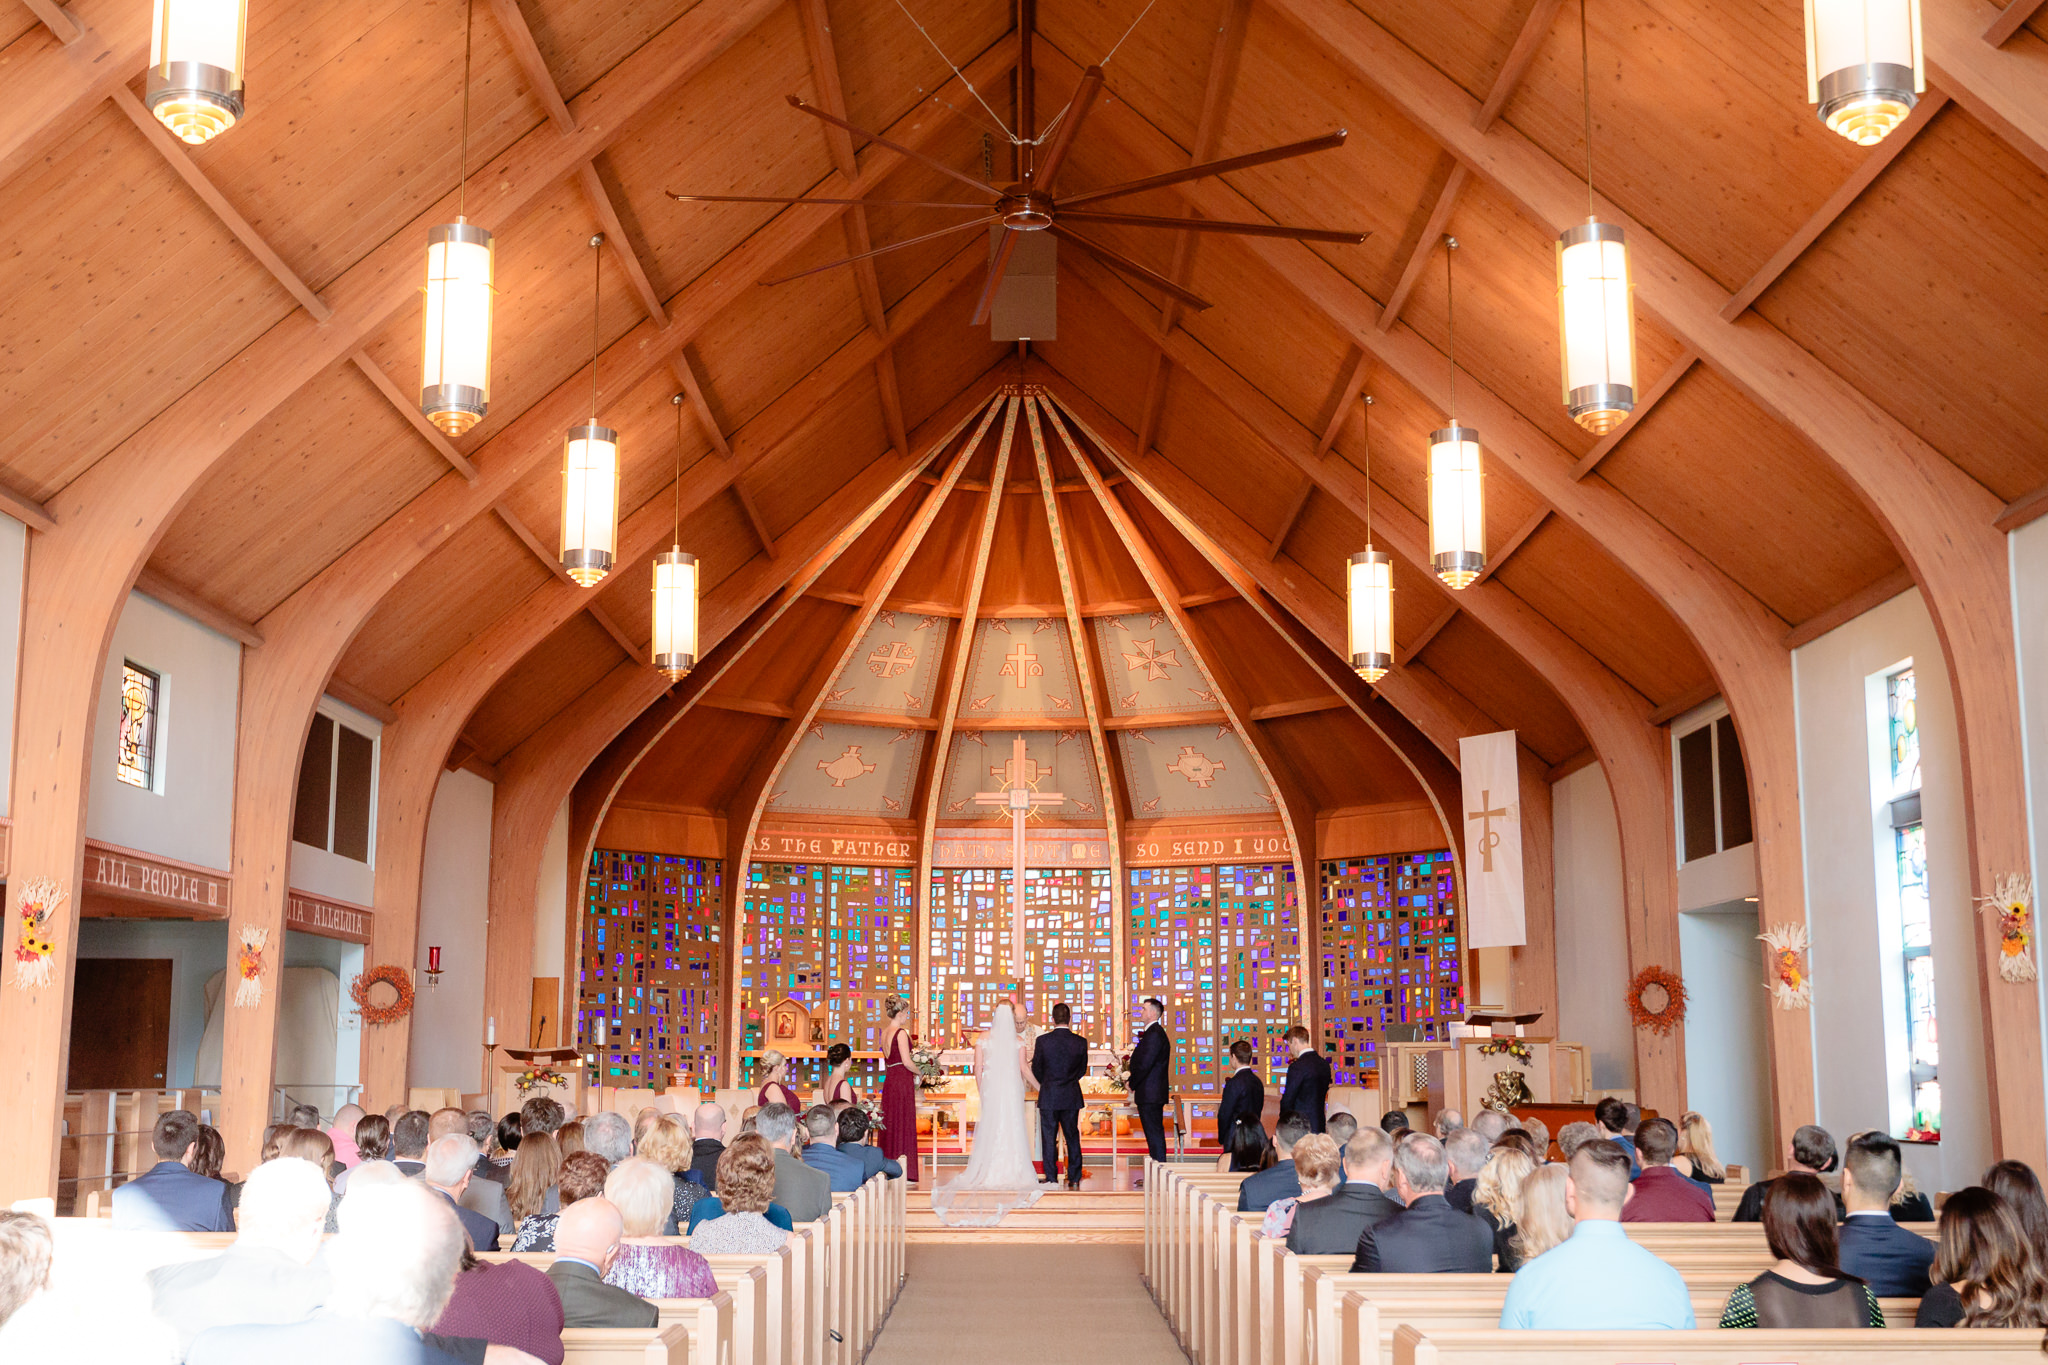 Wedding ceremony at Zion Lutheran Church in Penn Hills, PA